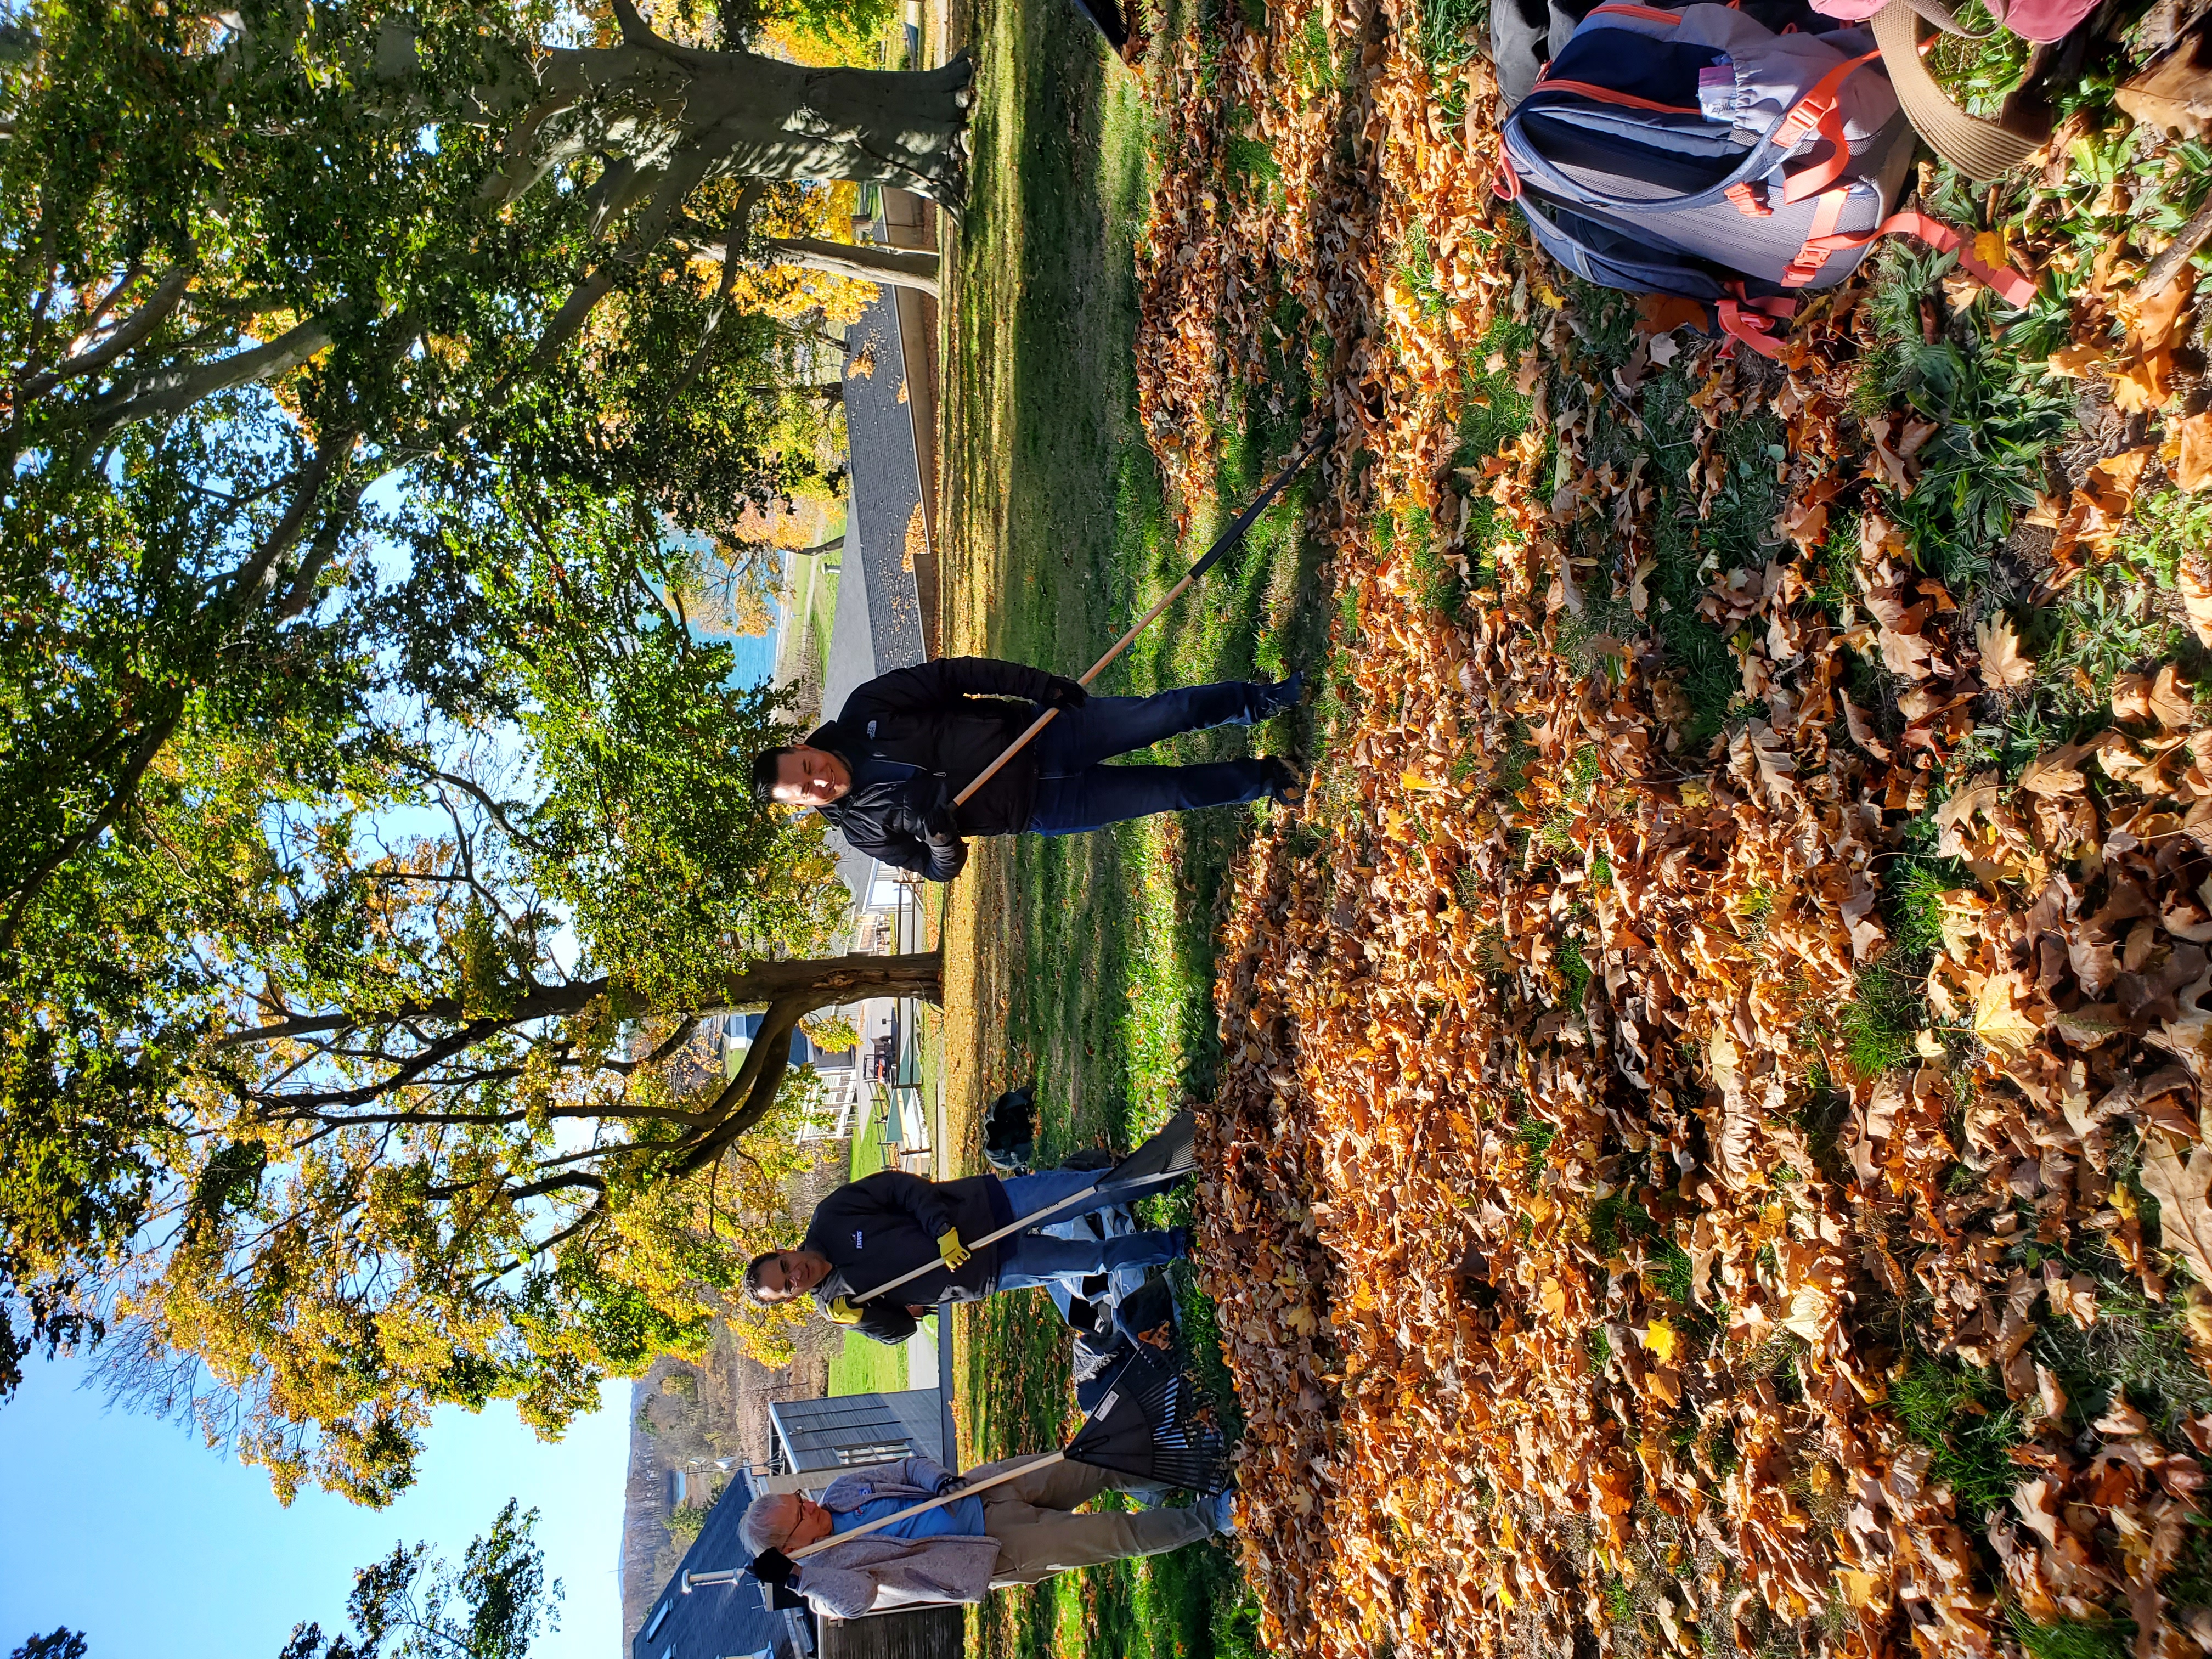 Members of our Boston office supported Thompson Island during a day of service. Here, they are raking leaves.